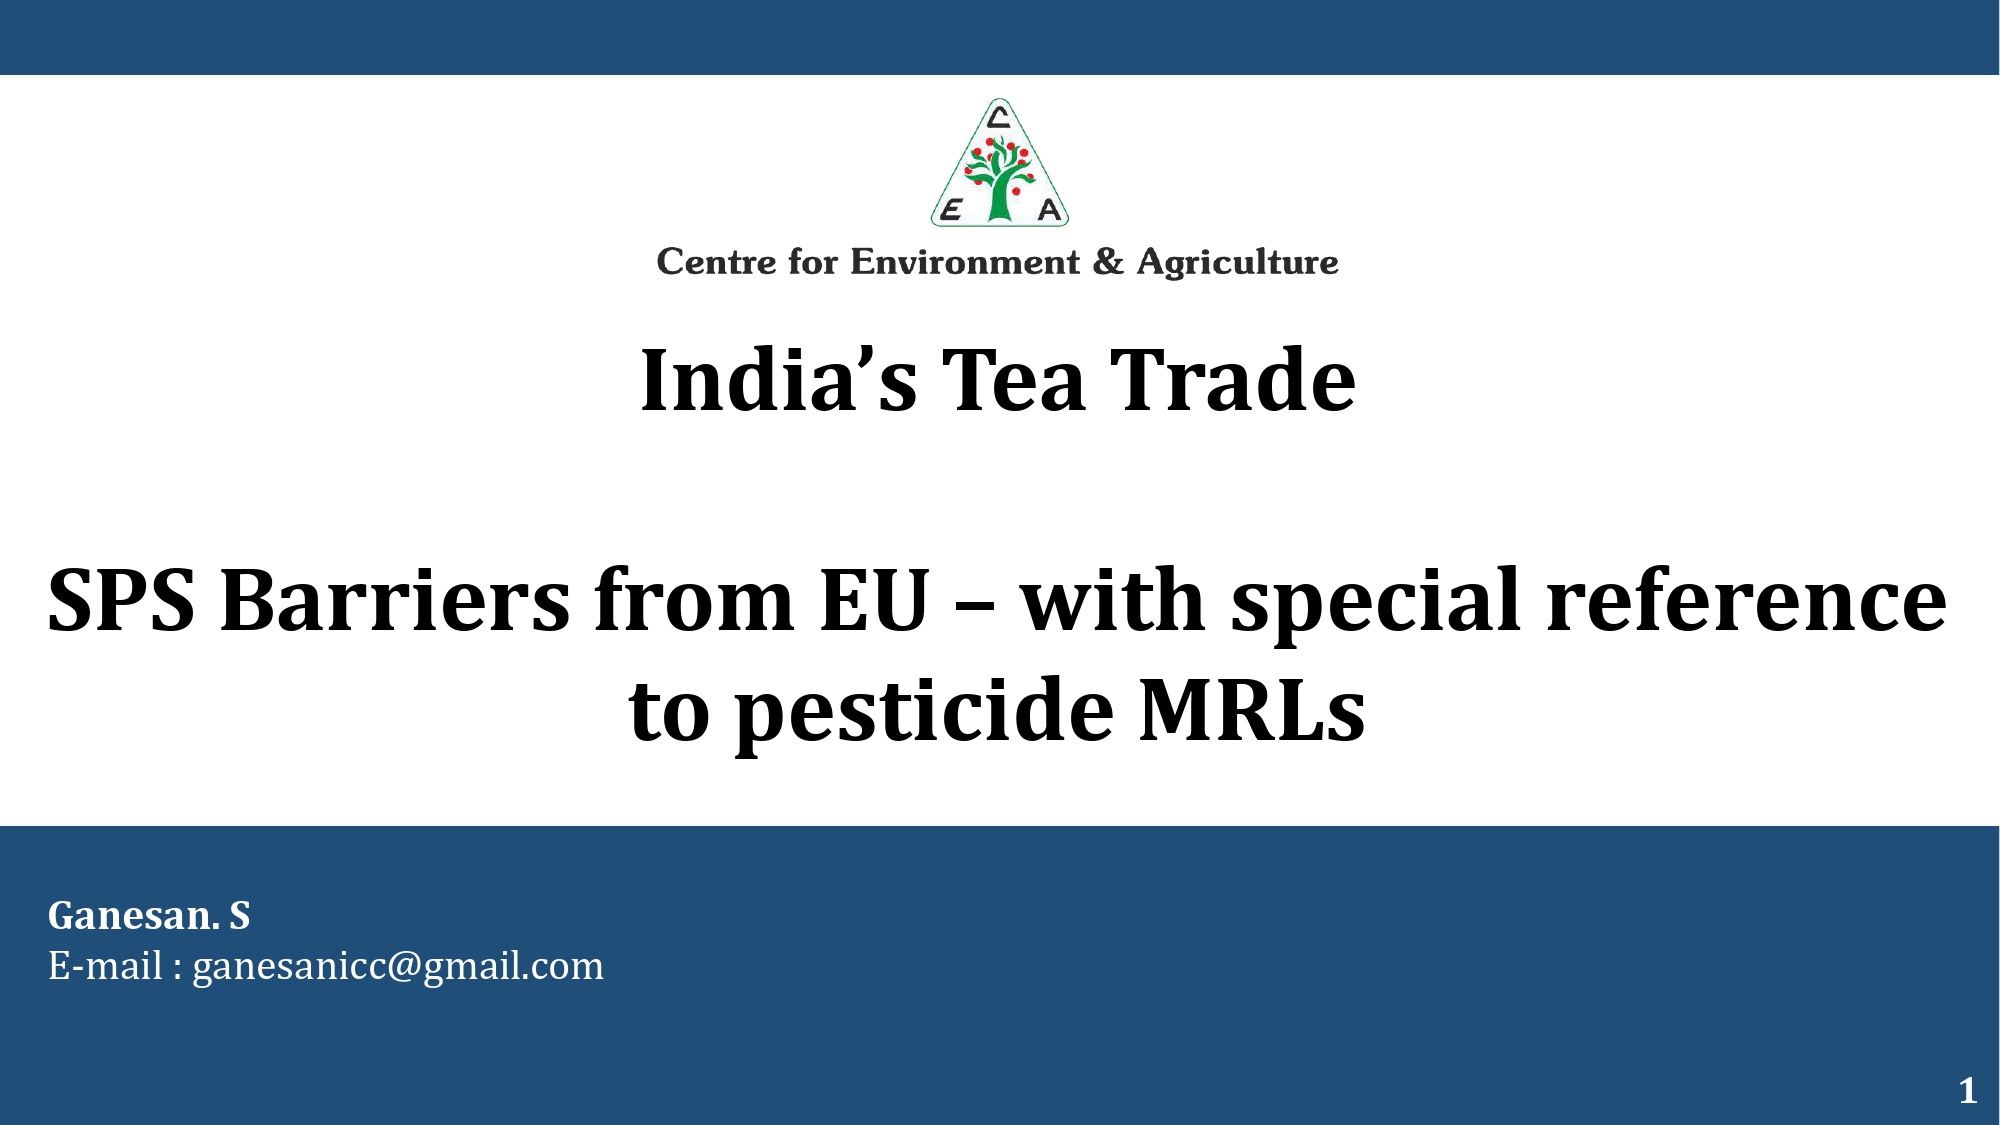 India's Tea Trade and SPS Barrier from EU - CENTEGRO_compressed_page-0001